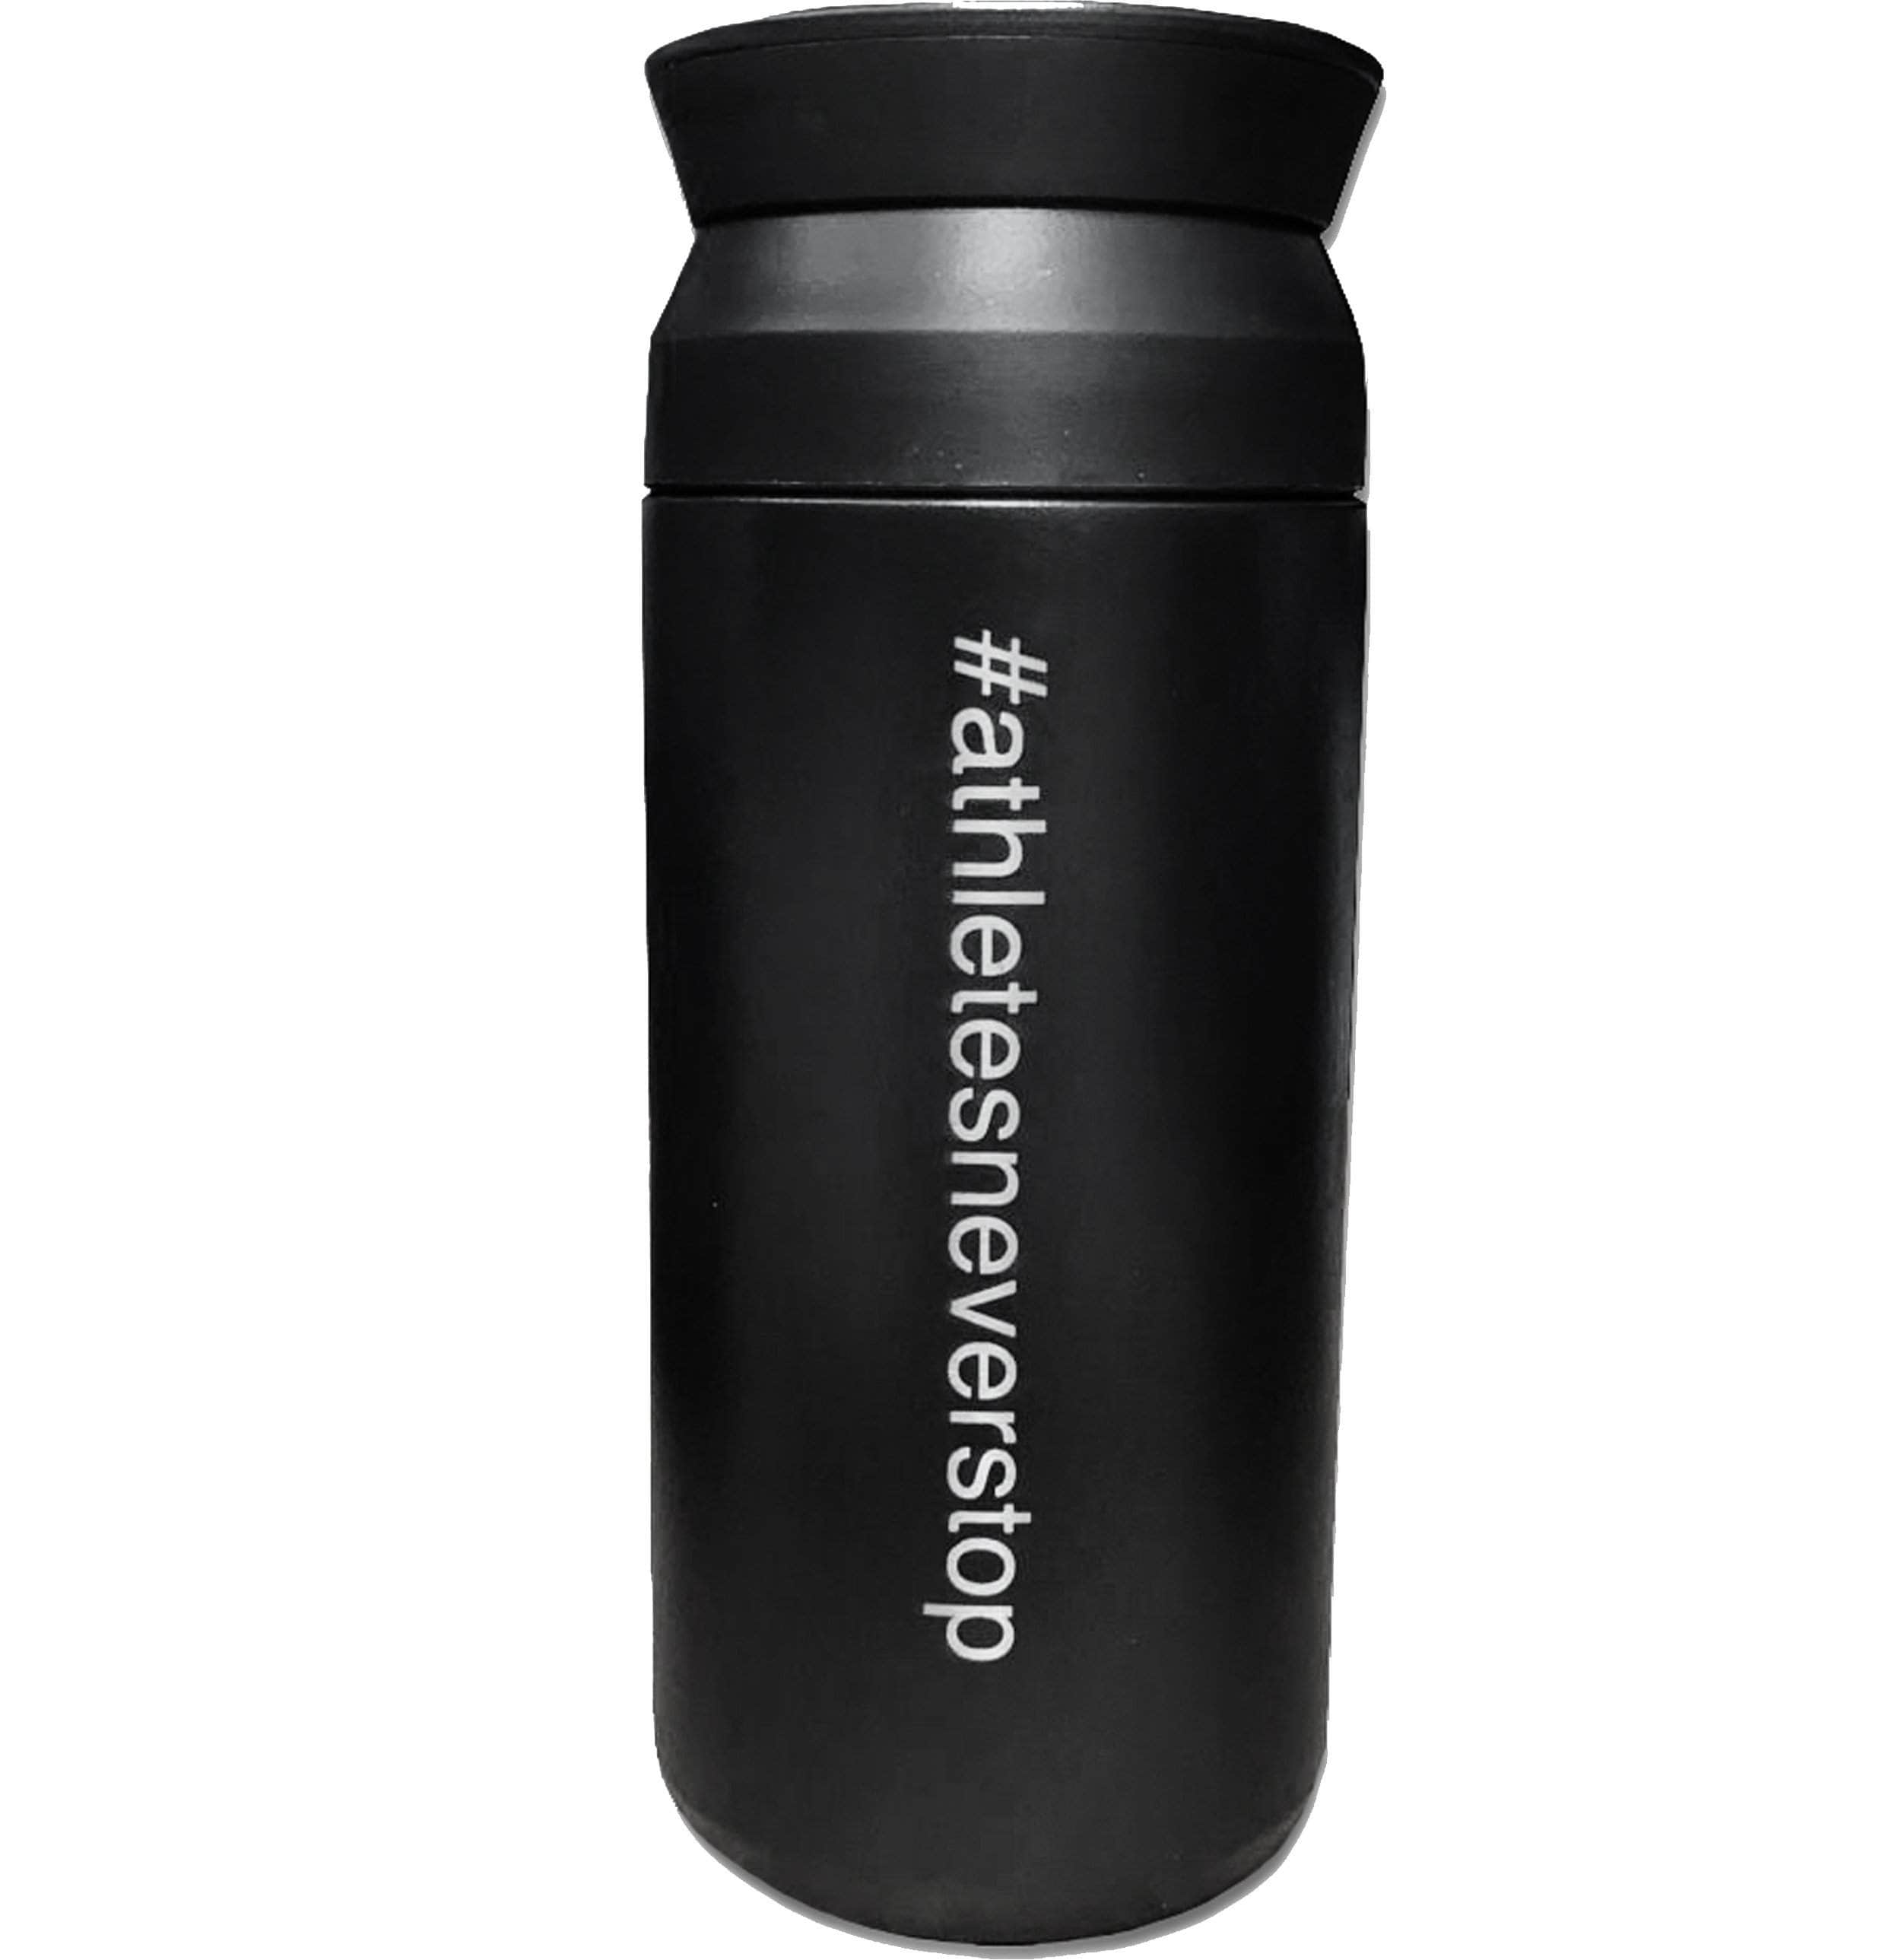 Built for Athletes Bottles Black Stainless Steel Reusable Coffee Cup